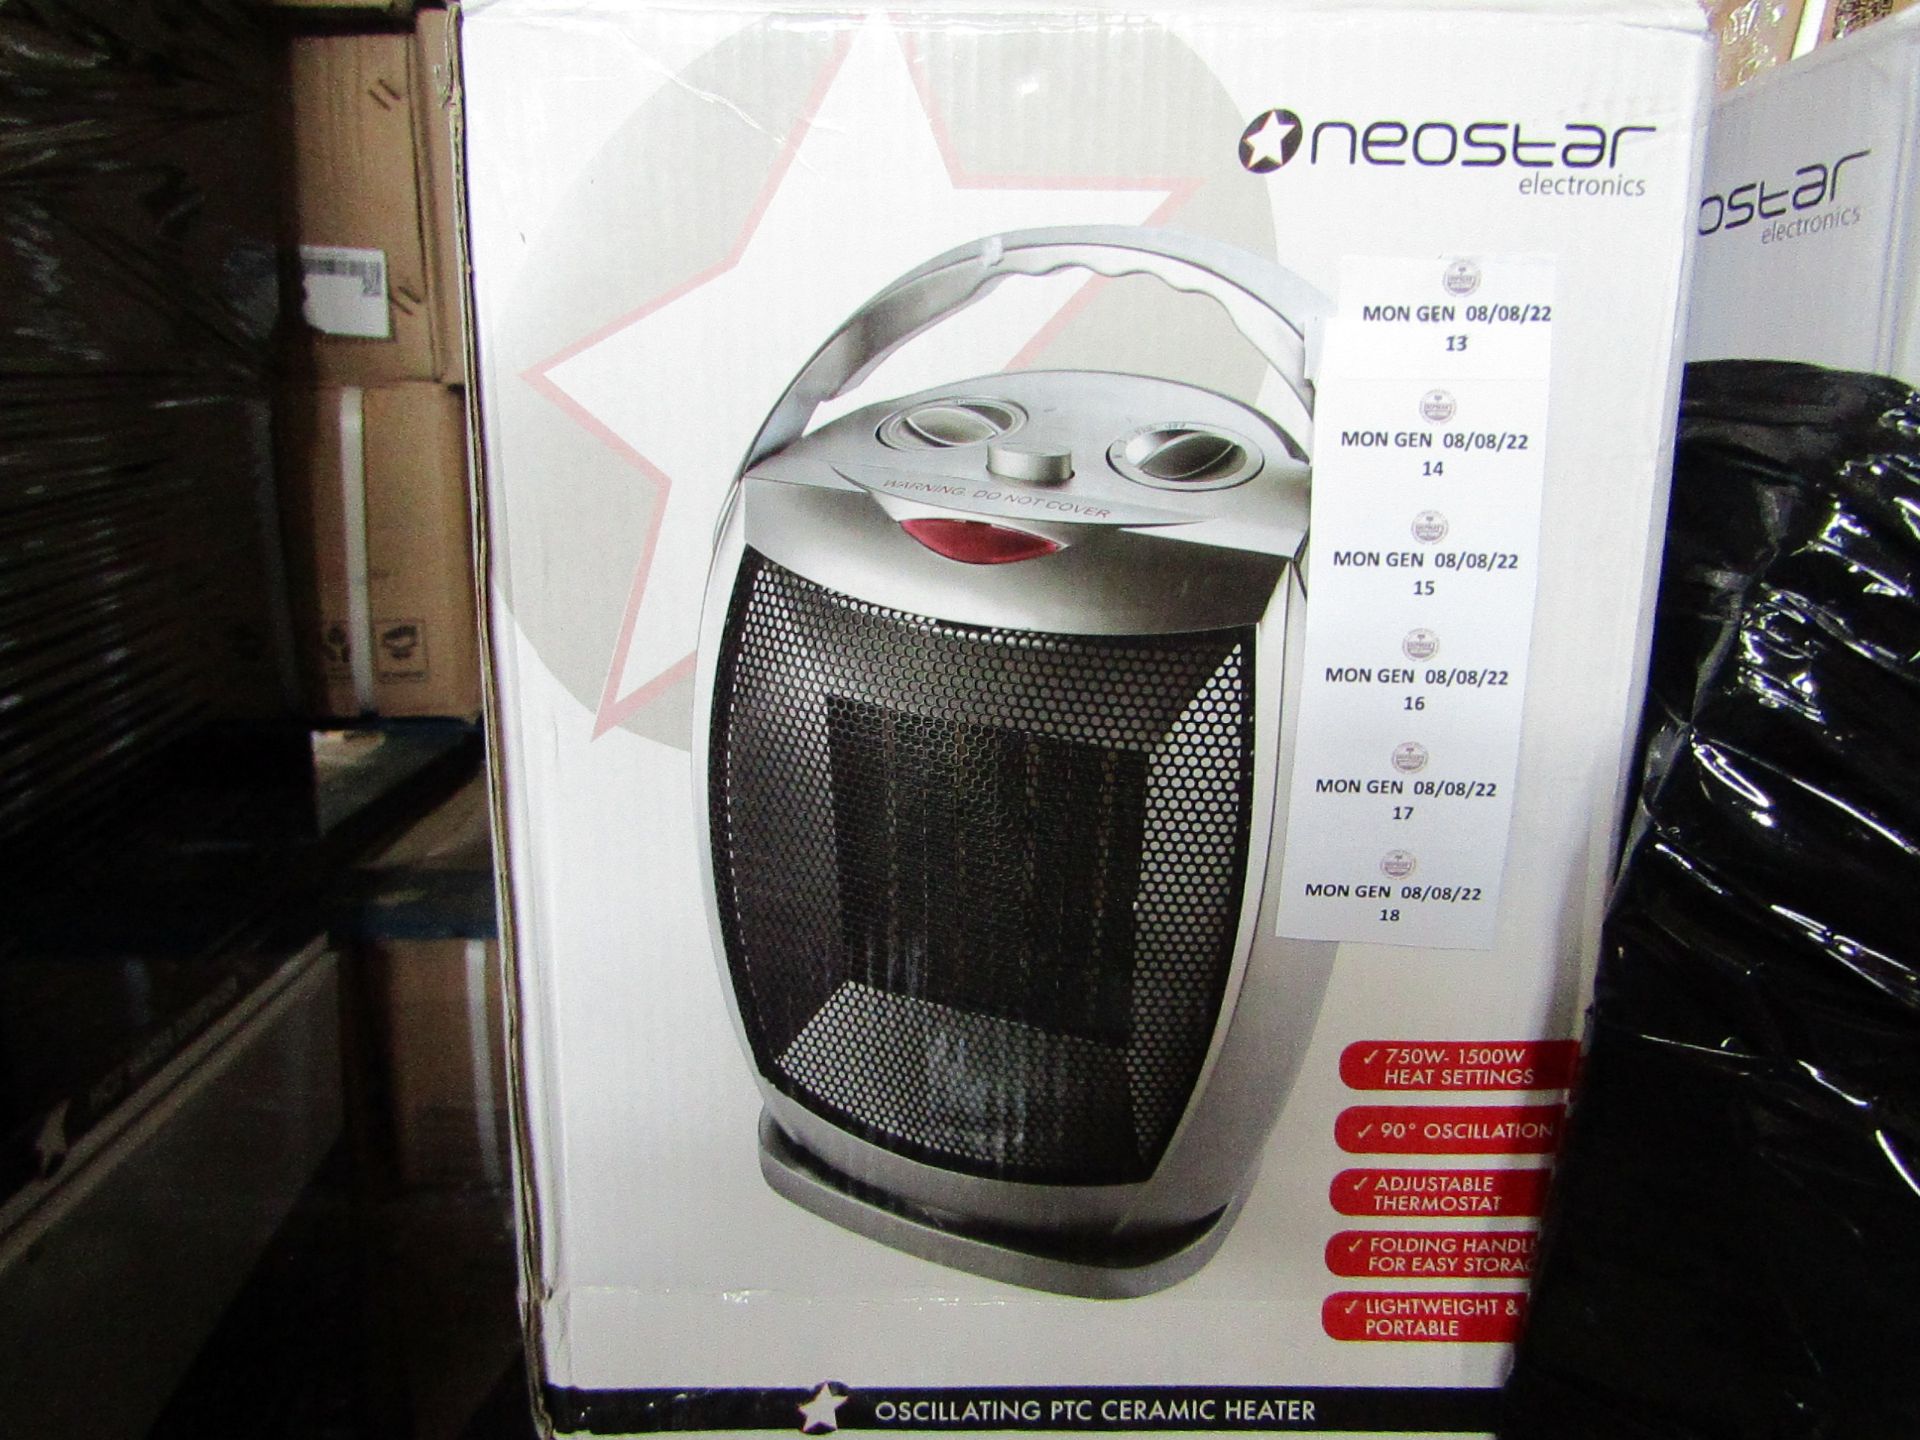 Scotts of Stow Neostar Oscillating PTC Heater RRP Â£49.95 - This product has been graded in B